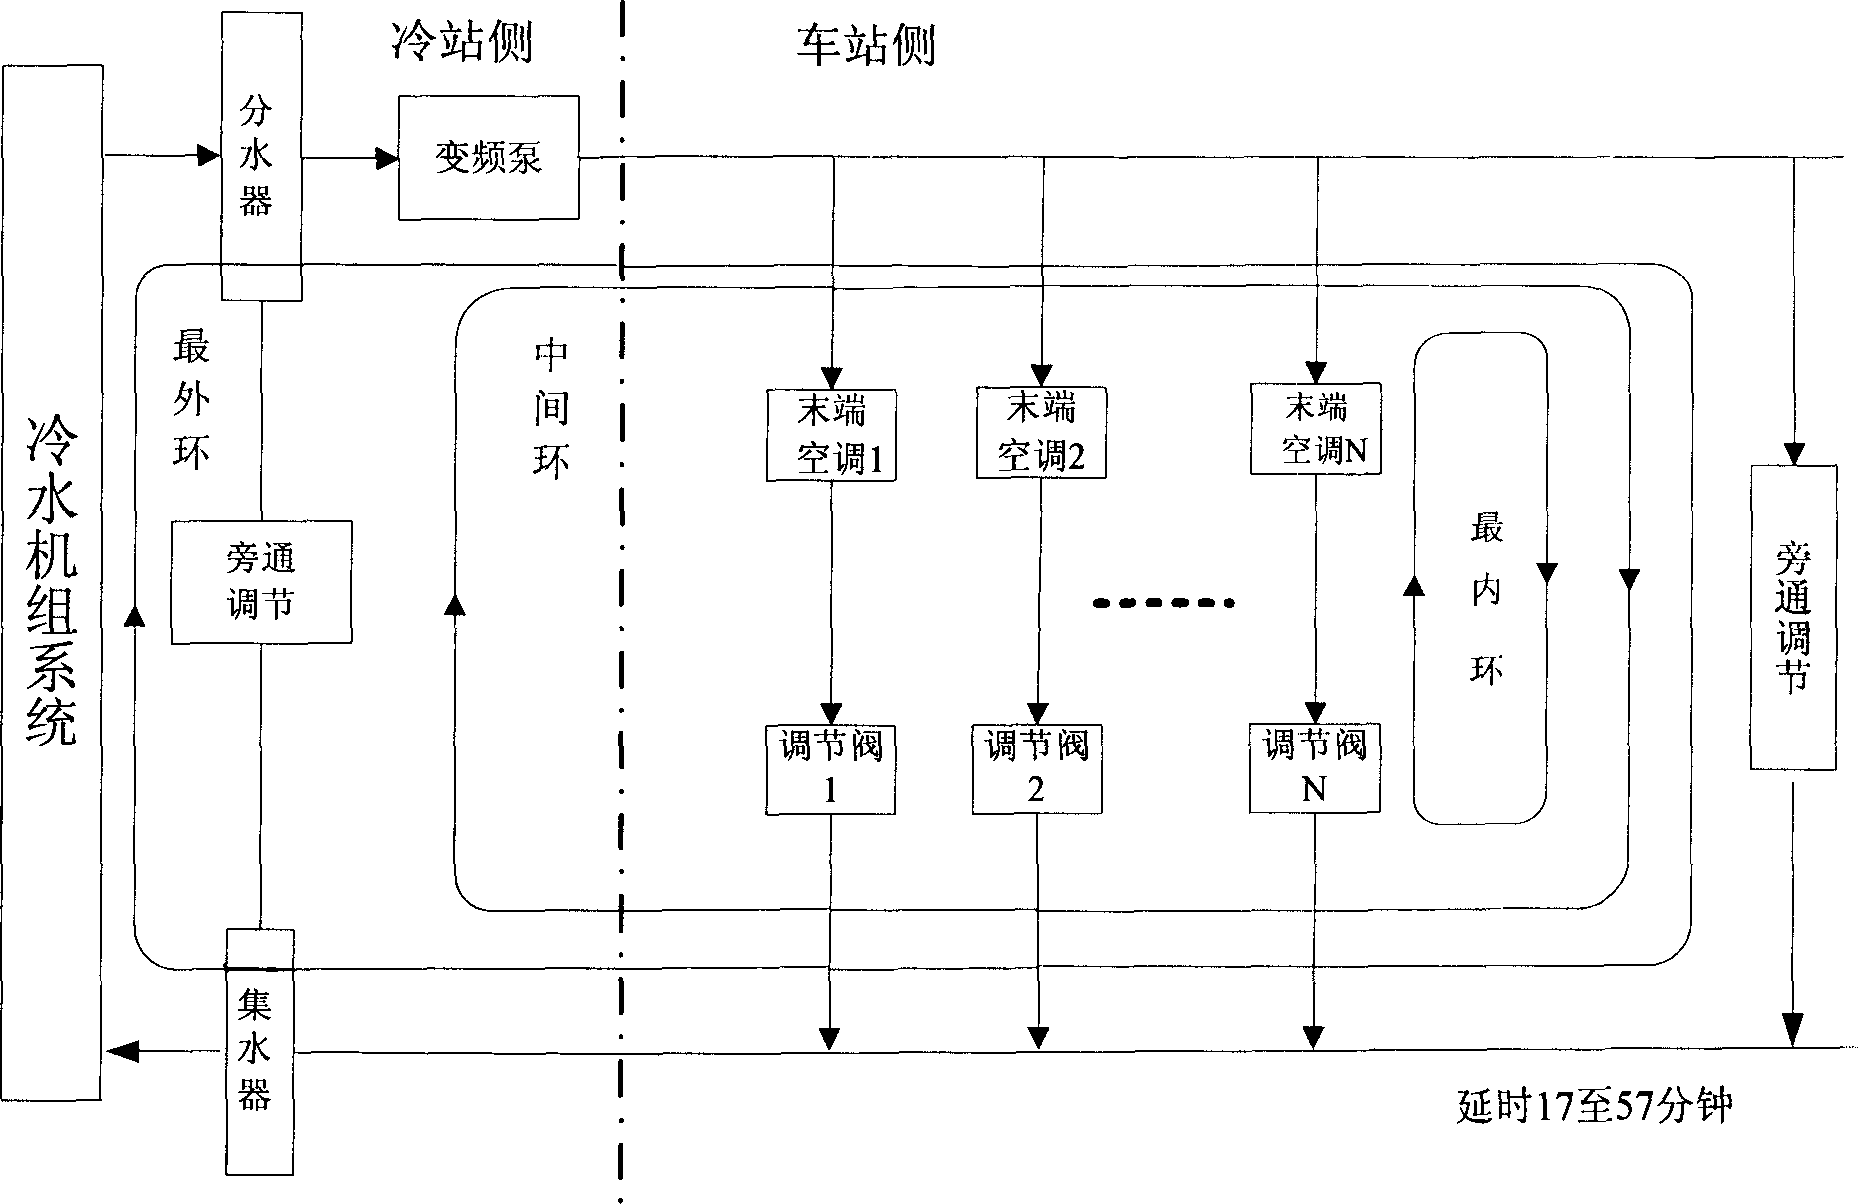 Automatic control method for central cold supply system